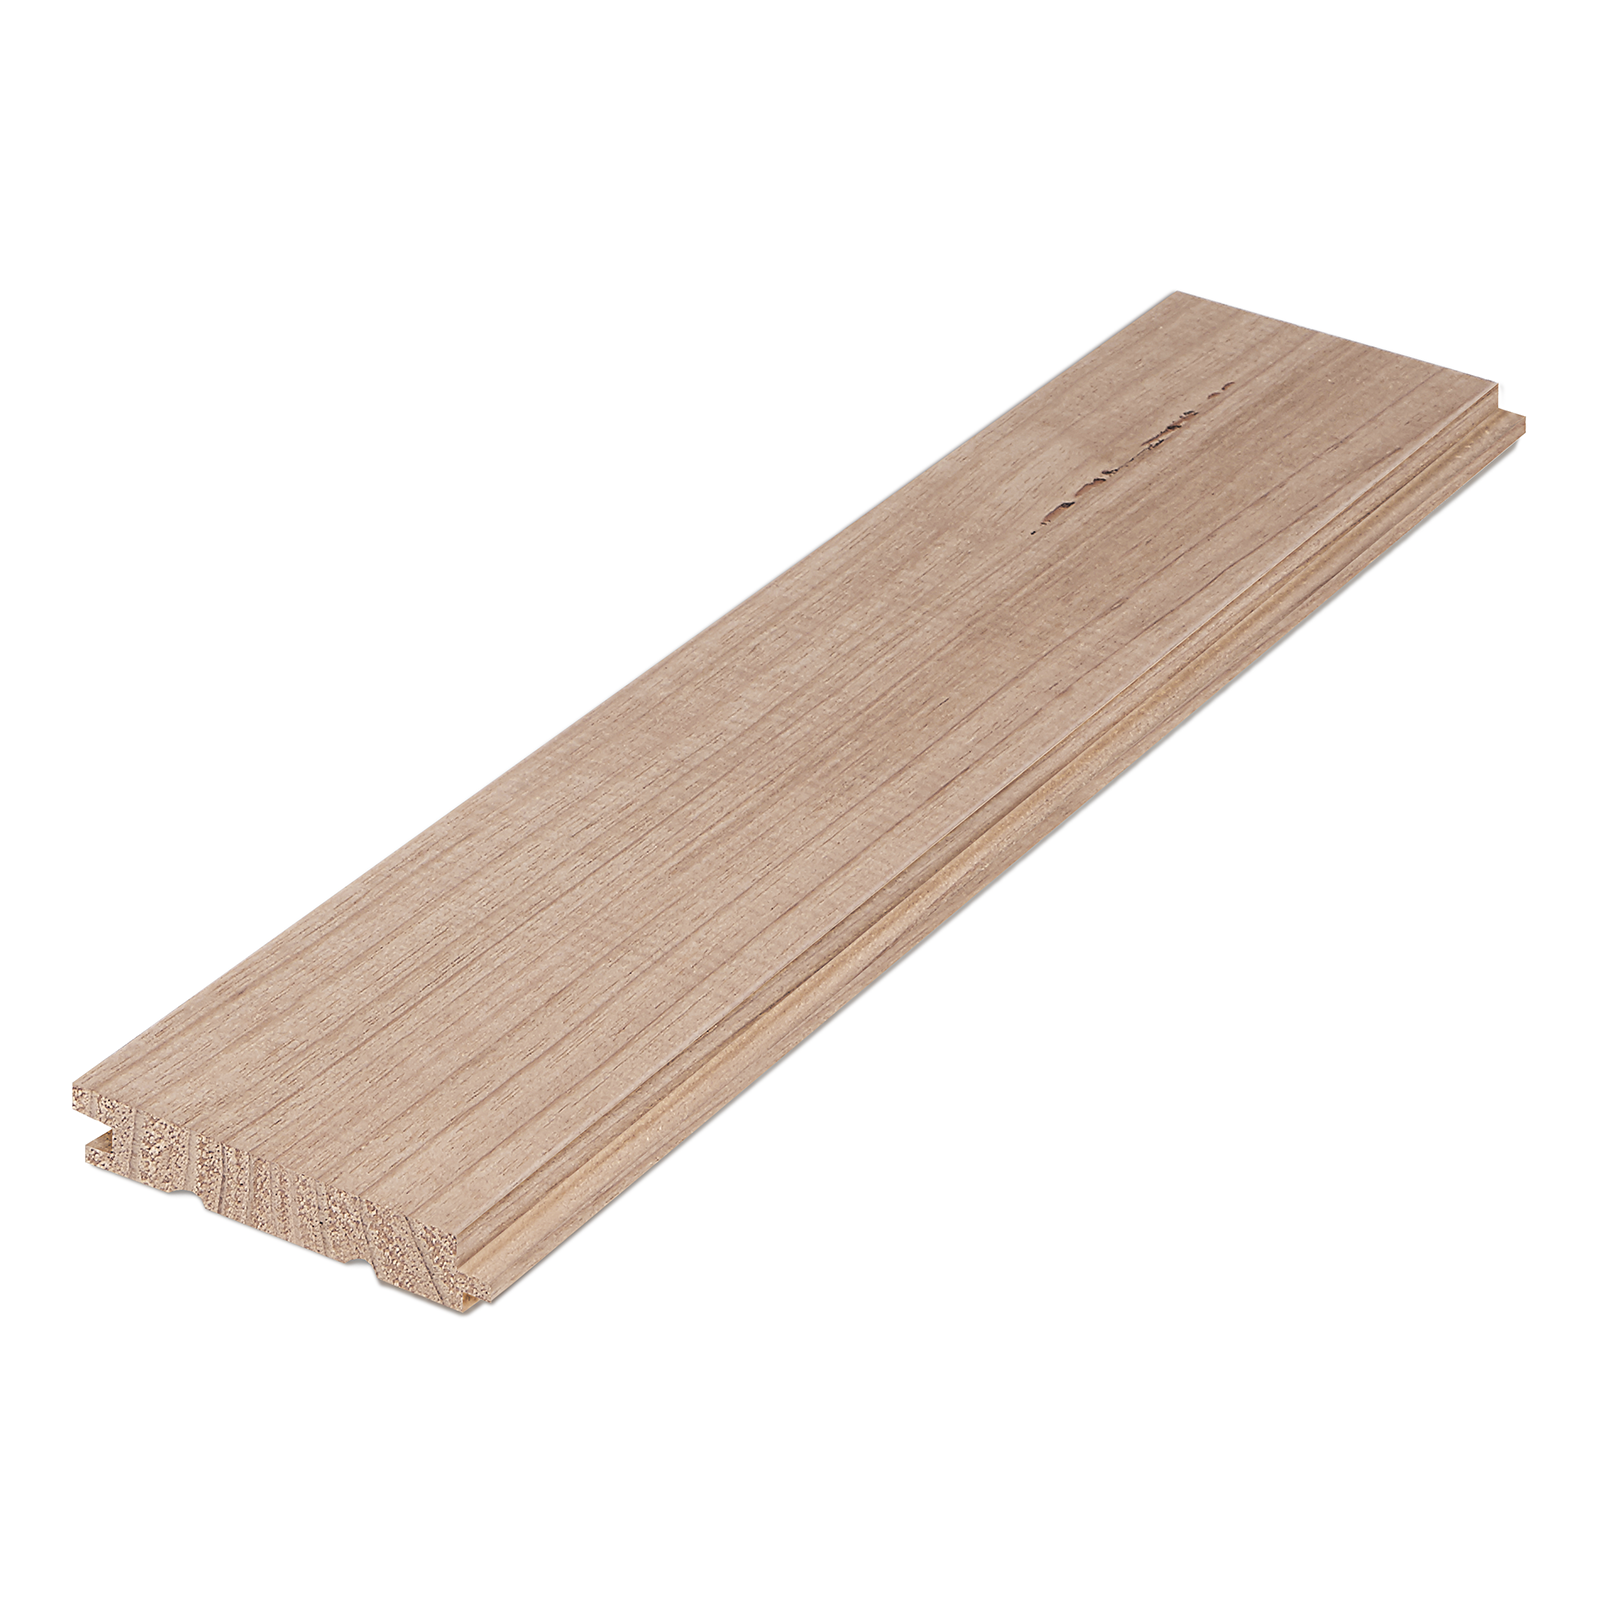 65 x 12mm Tasmanian Oak Flooring Standard Grade with Tongue and Groove Profile